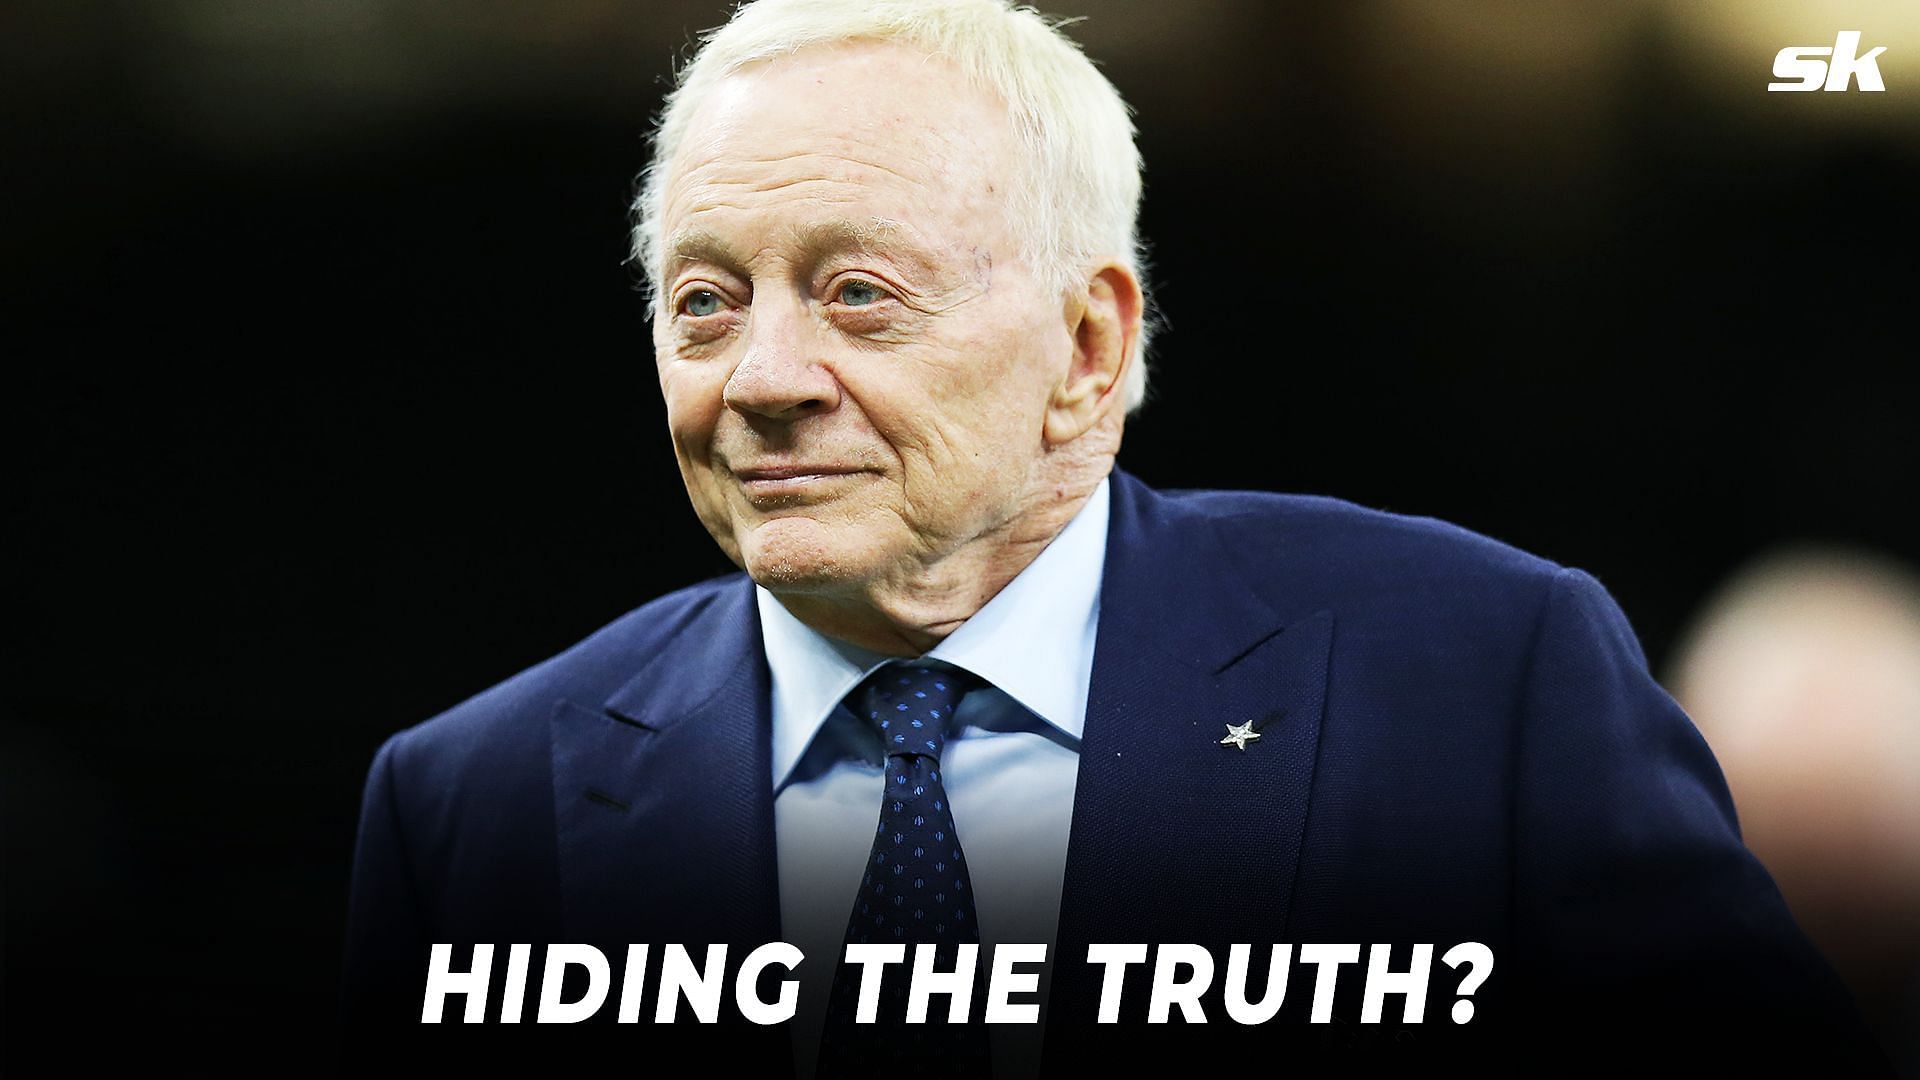 Is Cowboys owner Jerry Jones hiding the truth?